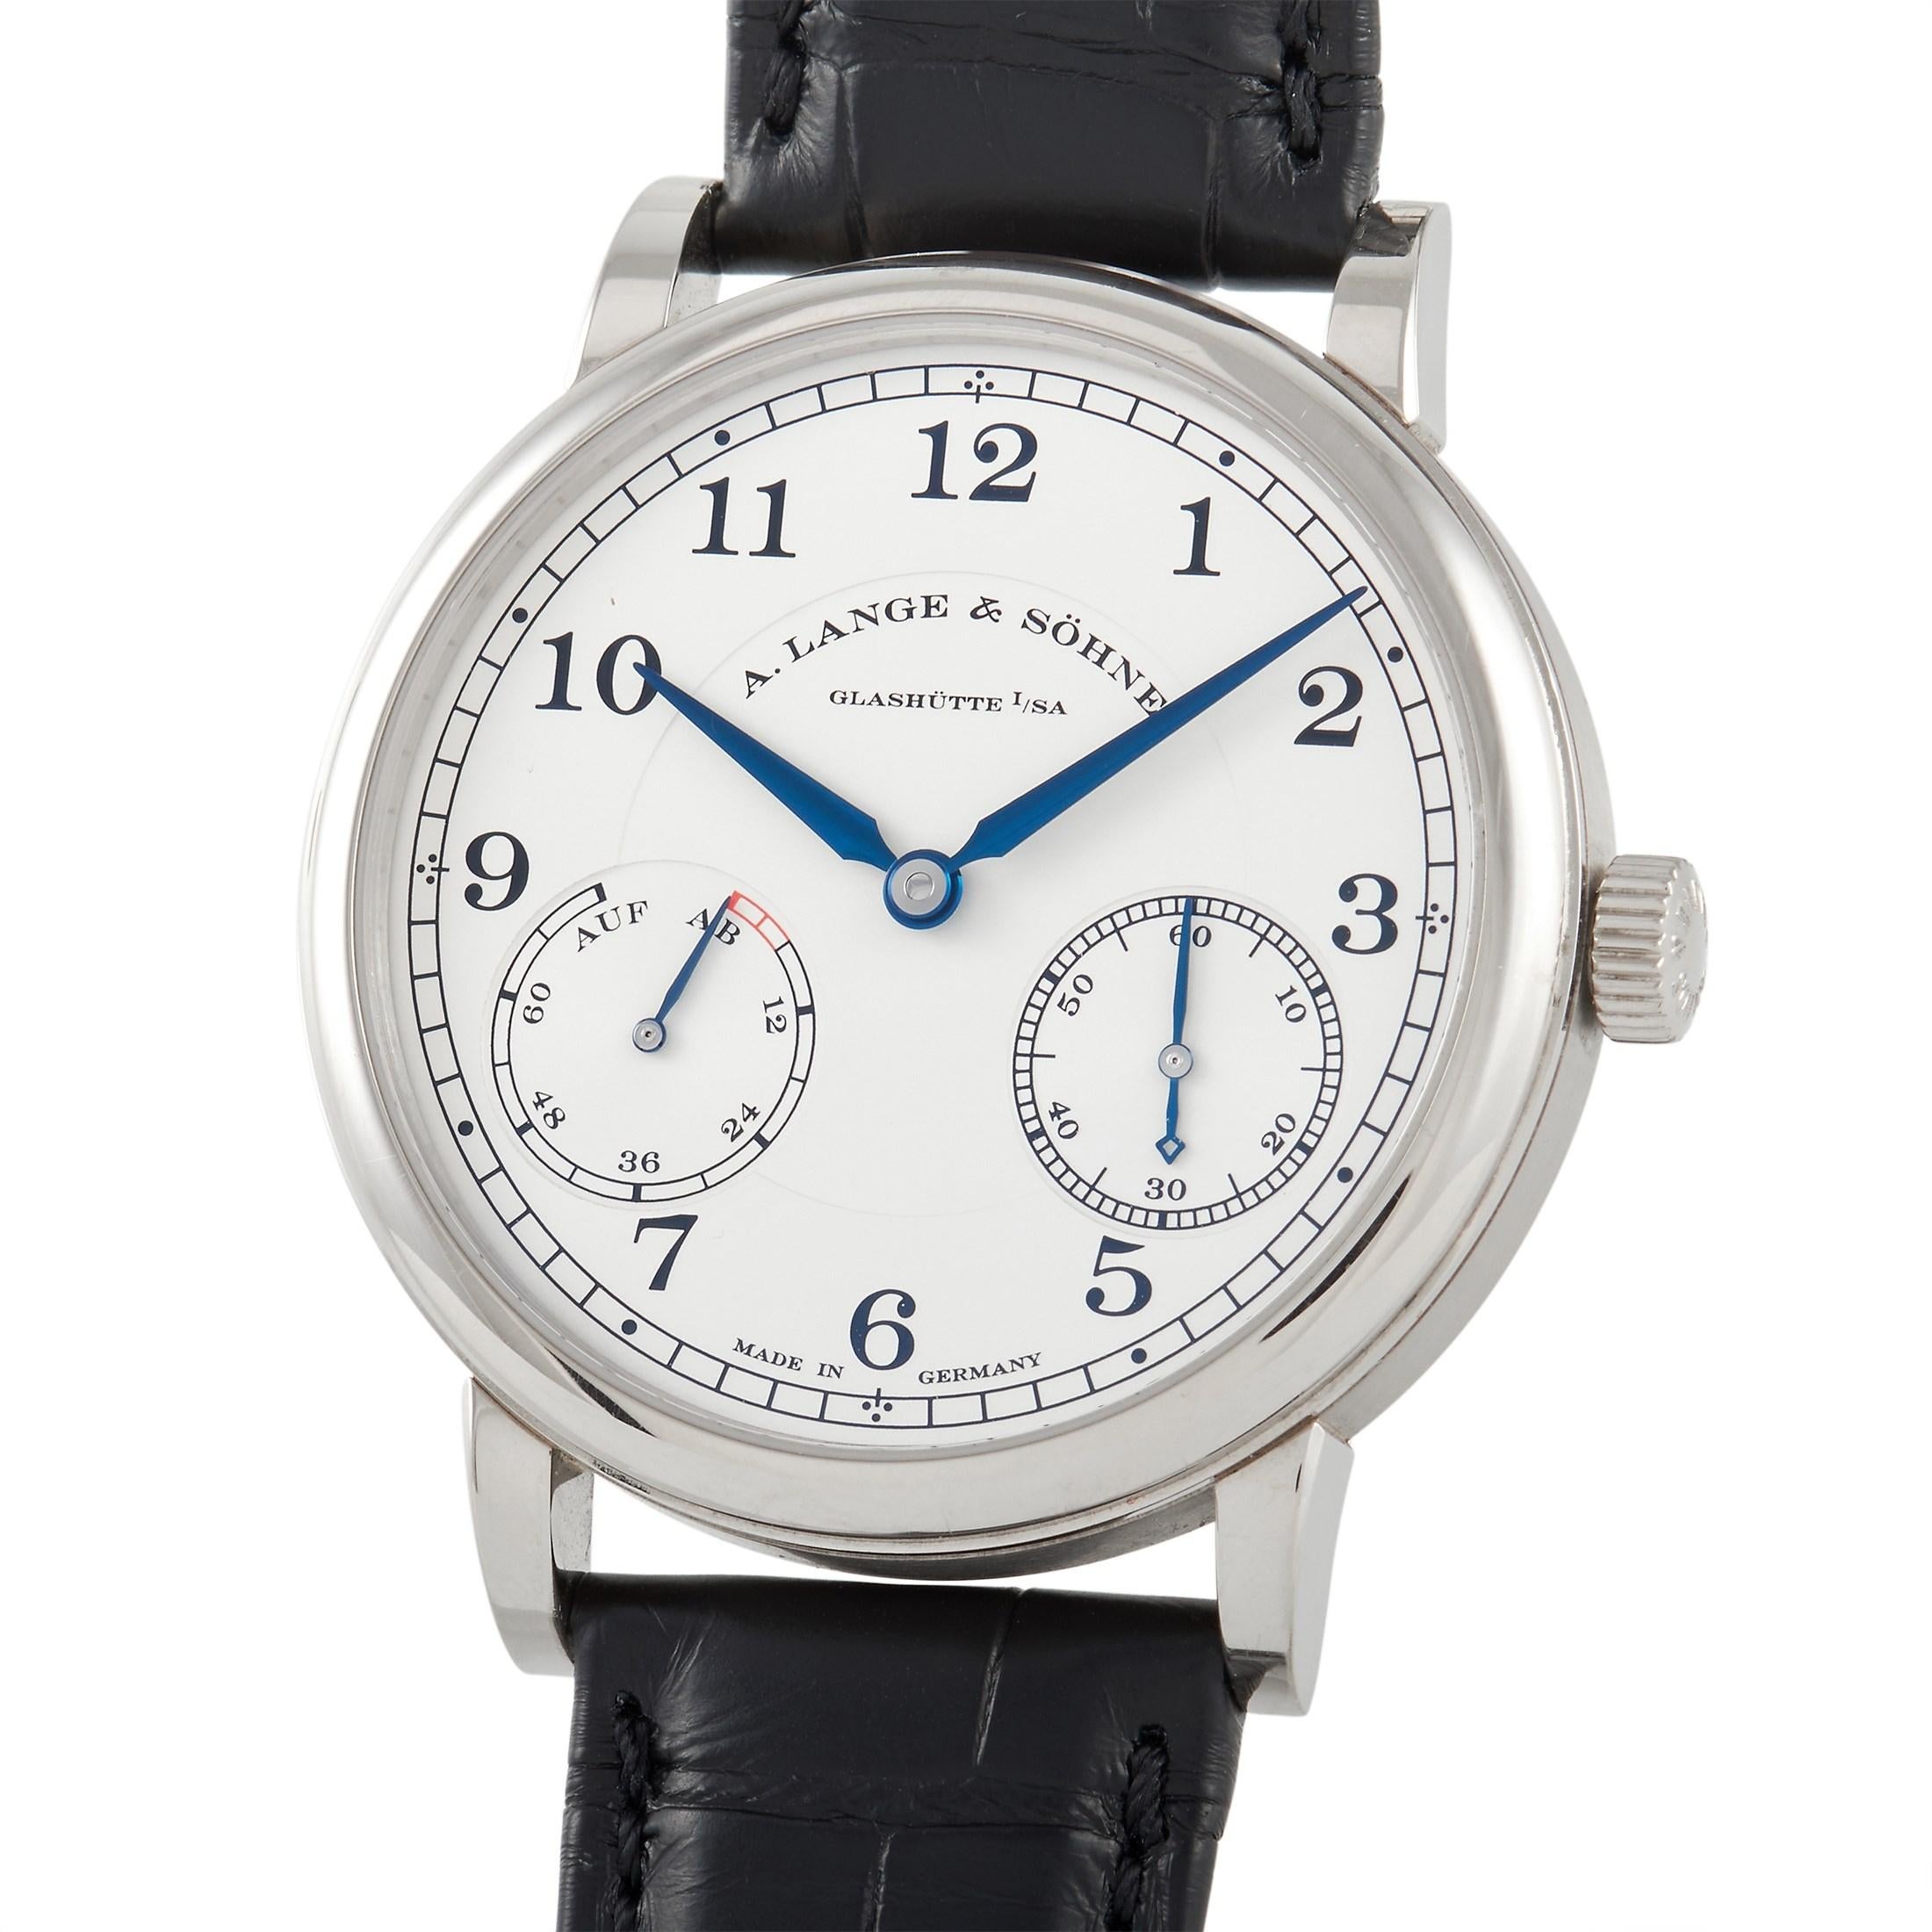 Offering precise legibility and understated elegance is this A. Lange & Söhne 1815 Up Down 18K White Gold Watch 234.026. This watch features a polished 18K white gold case with the case band or edge in a satin finish. It is paired with a flat